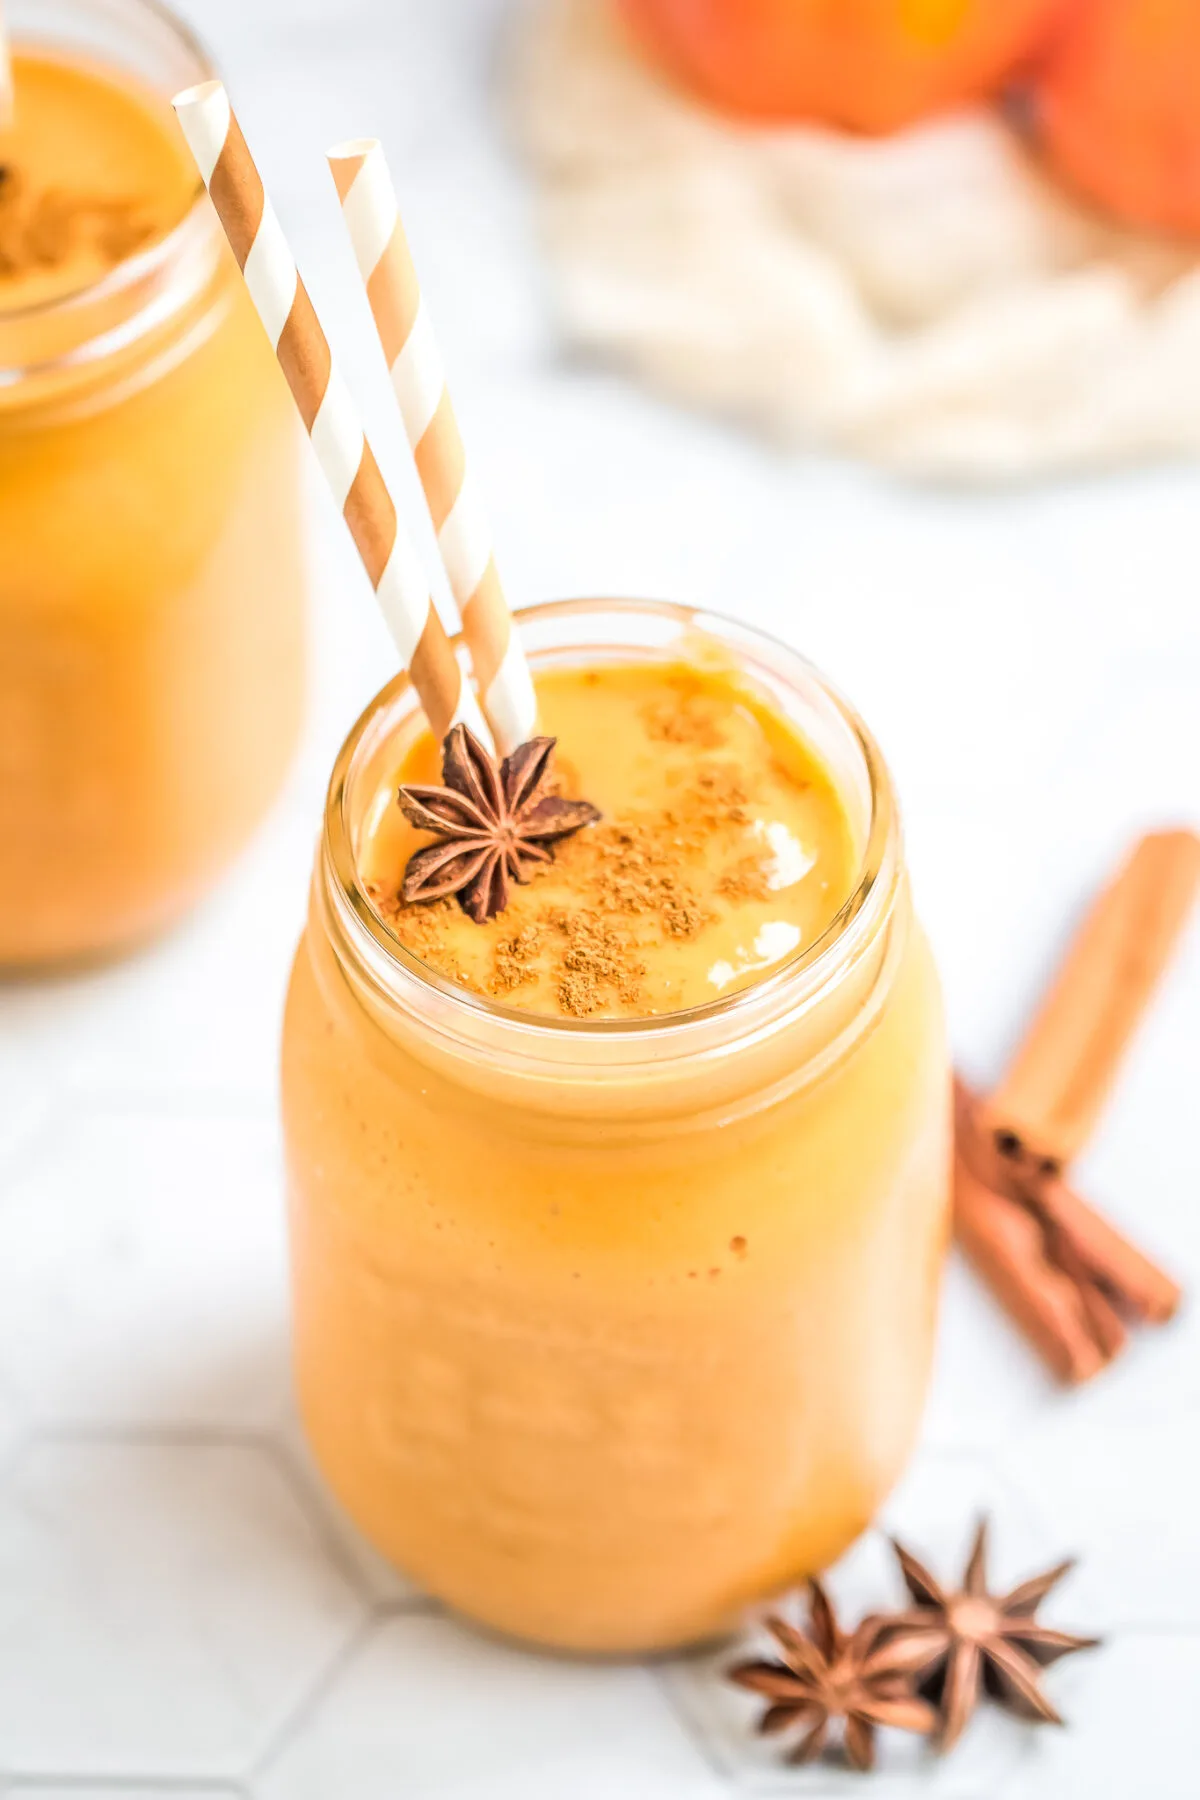 This sweet and creamy pumpkin pie smoothie tastes just like pumpkin pie filling. It’s perfect for a healthy and filling breakfast or dessert!